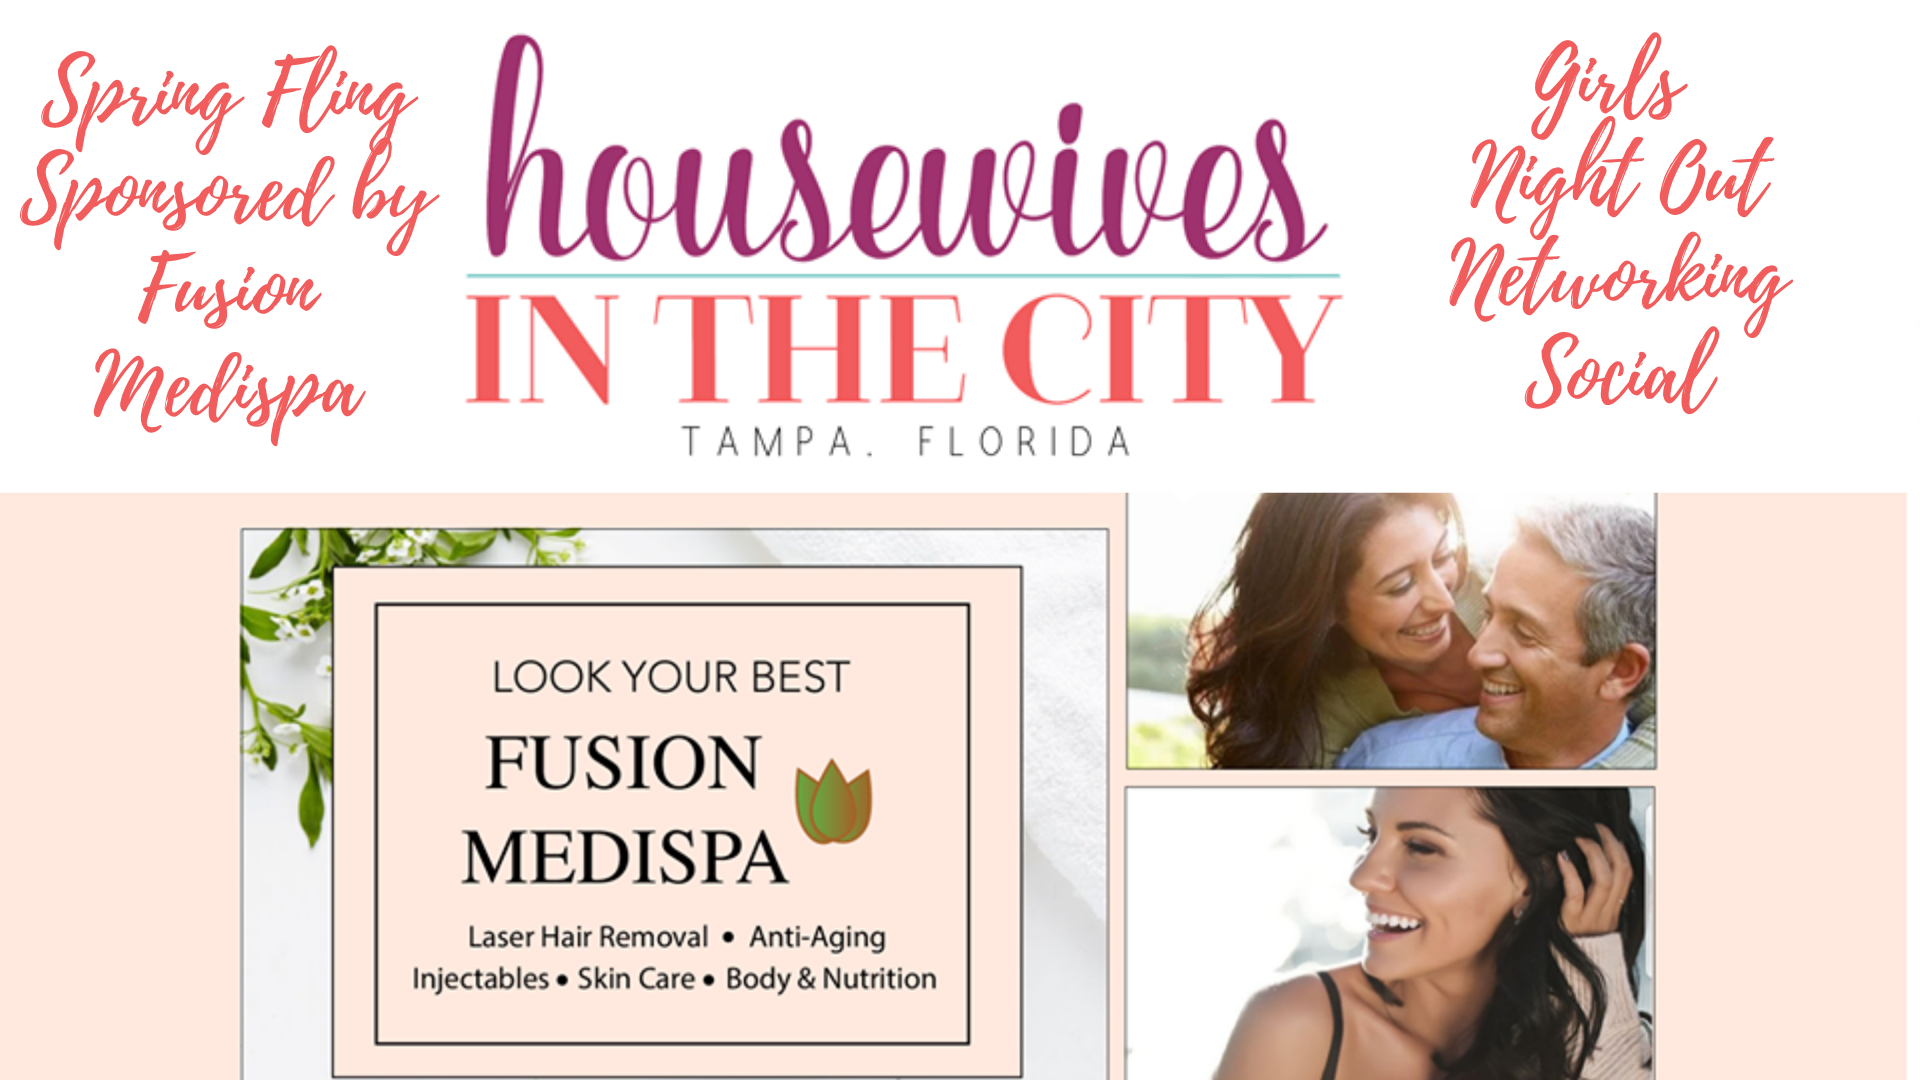 Spring Fling Girls Night Out Networking Social sponsored by Fusion Medispa